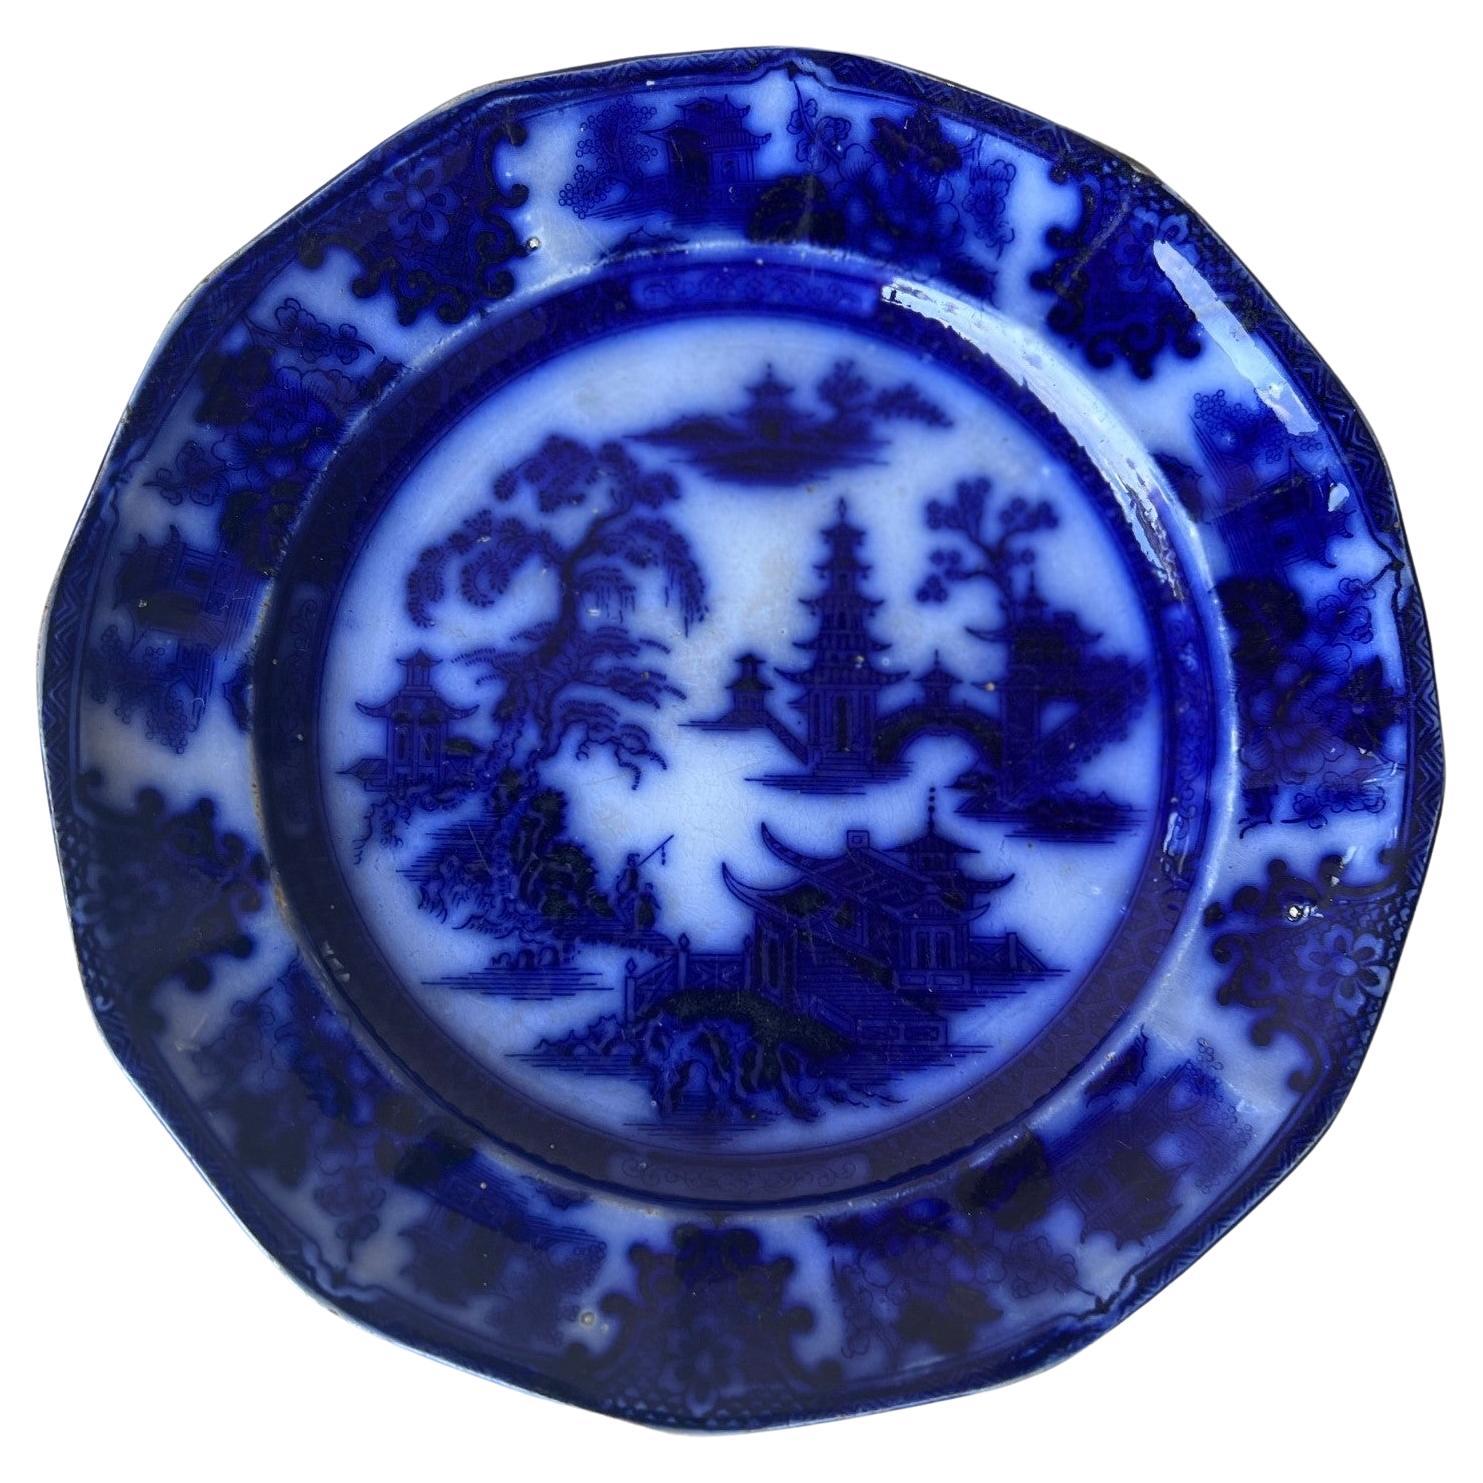 English Staffordshire plate made around 1850 by William Adams. The pattern is called 